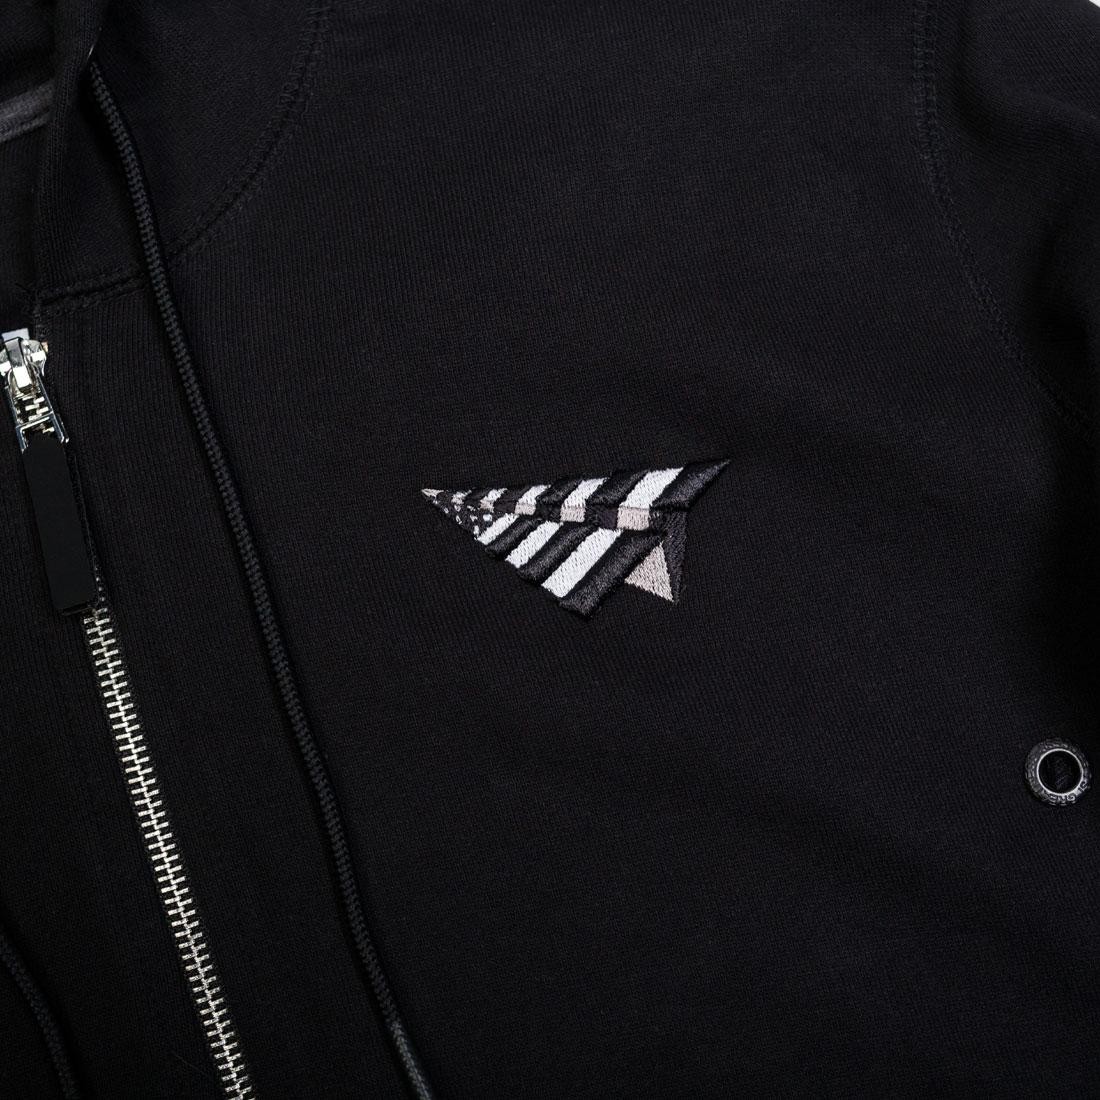 ROC NATION PAPER PLANES ICON HOODIE BLACK ALL SIZES 0918K203 AUTHENTIC BRAND NEW 